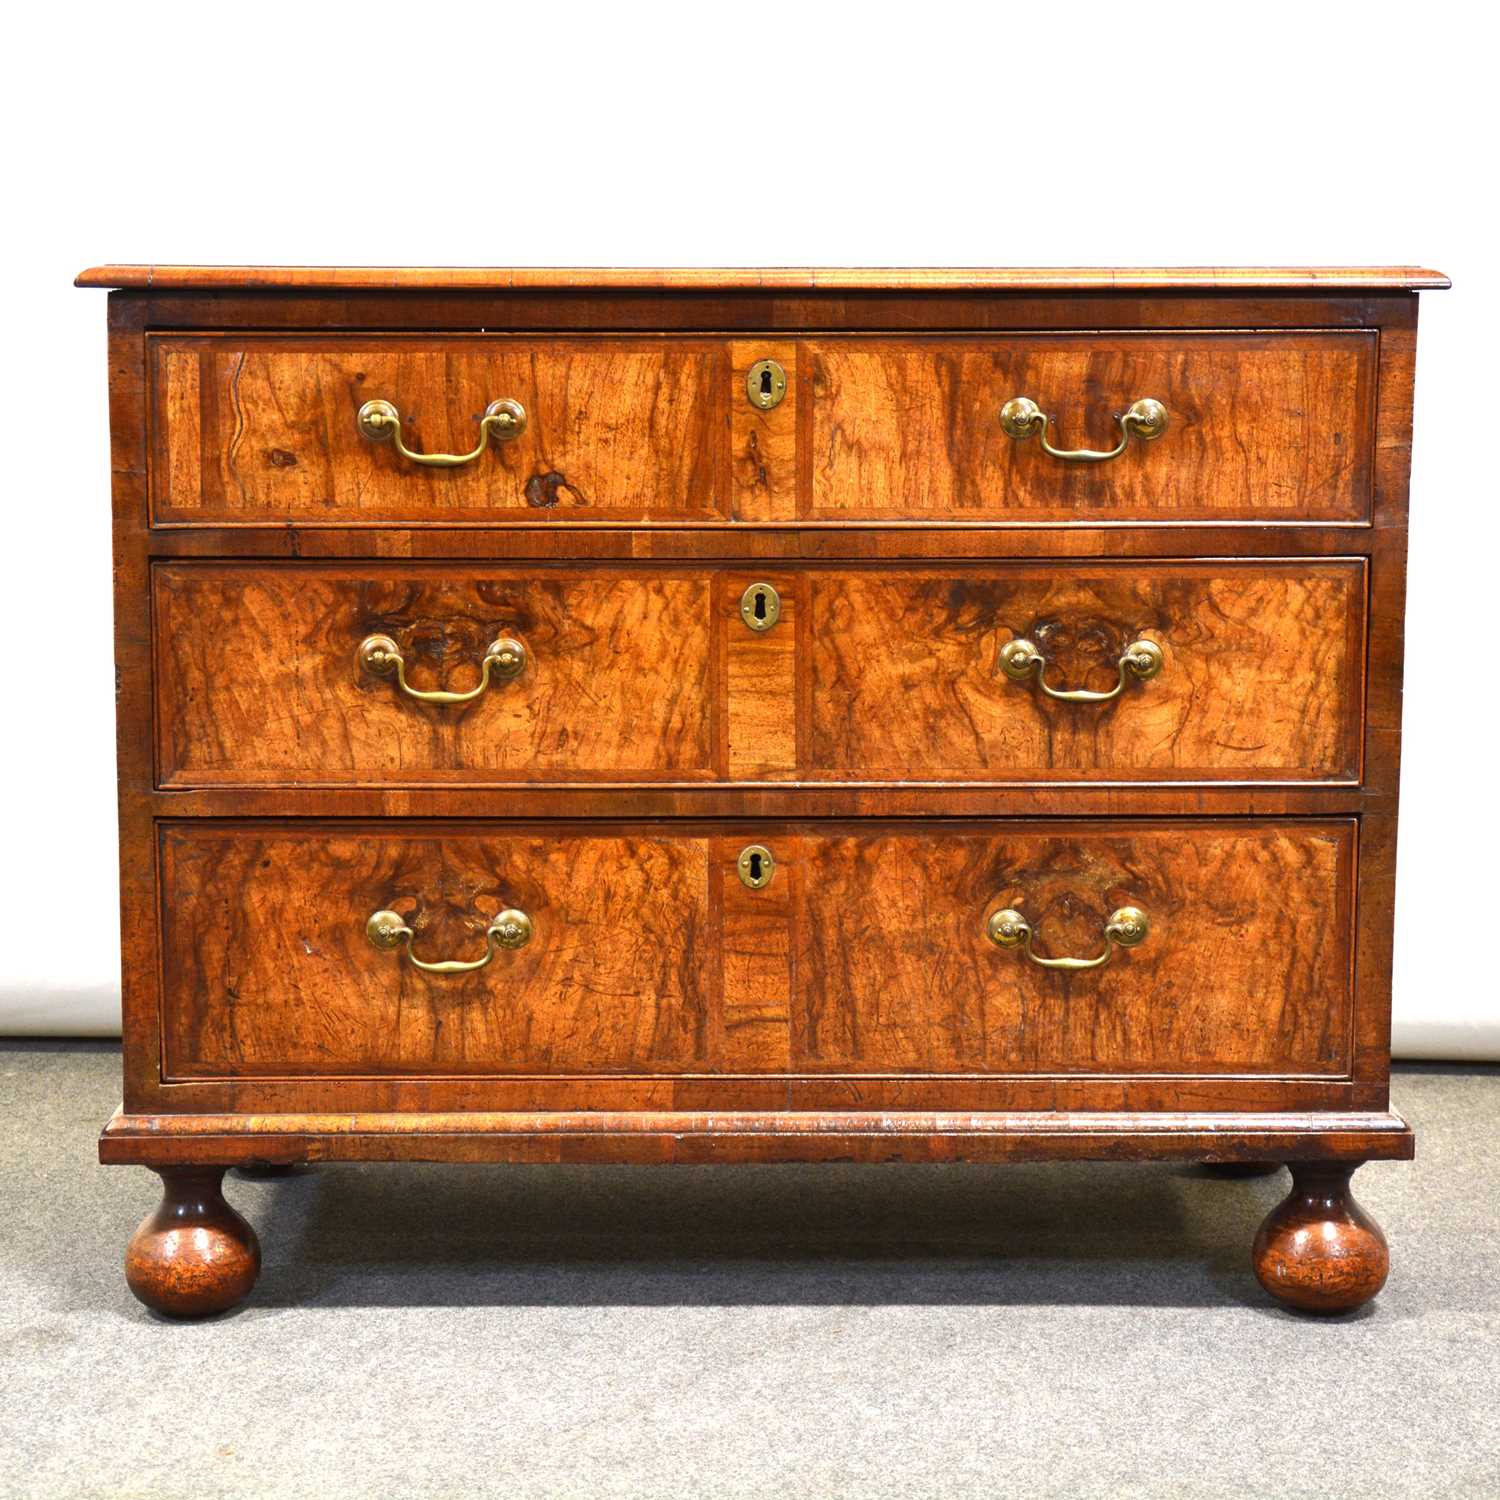 Early 18th century walnut chest of drawers,